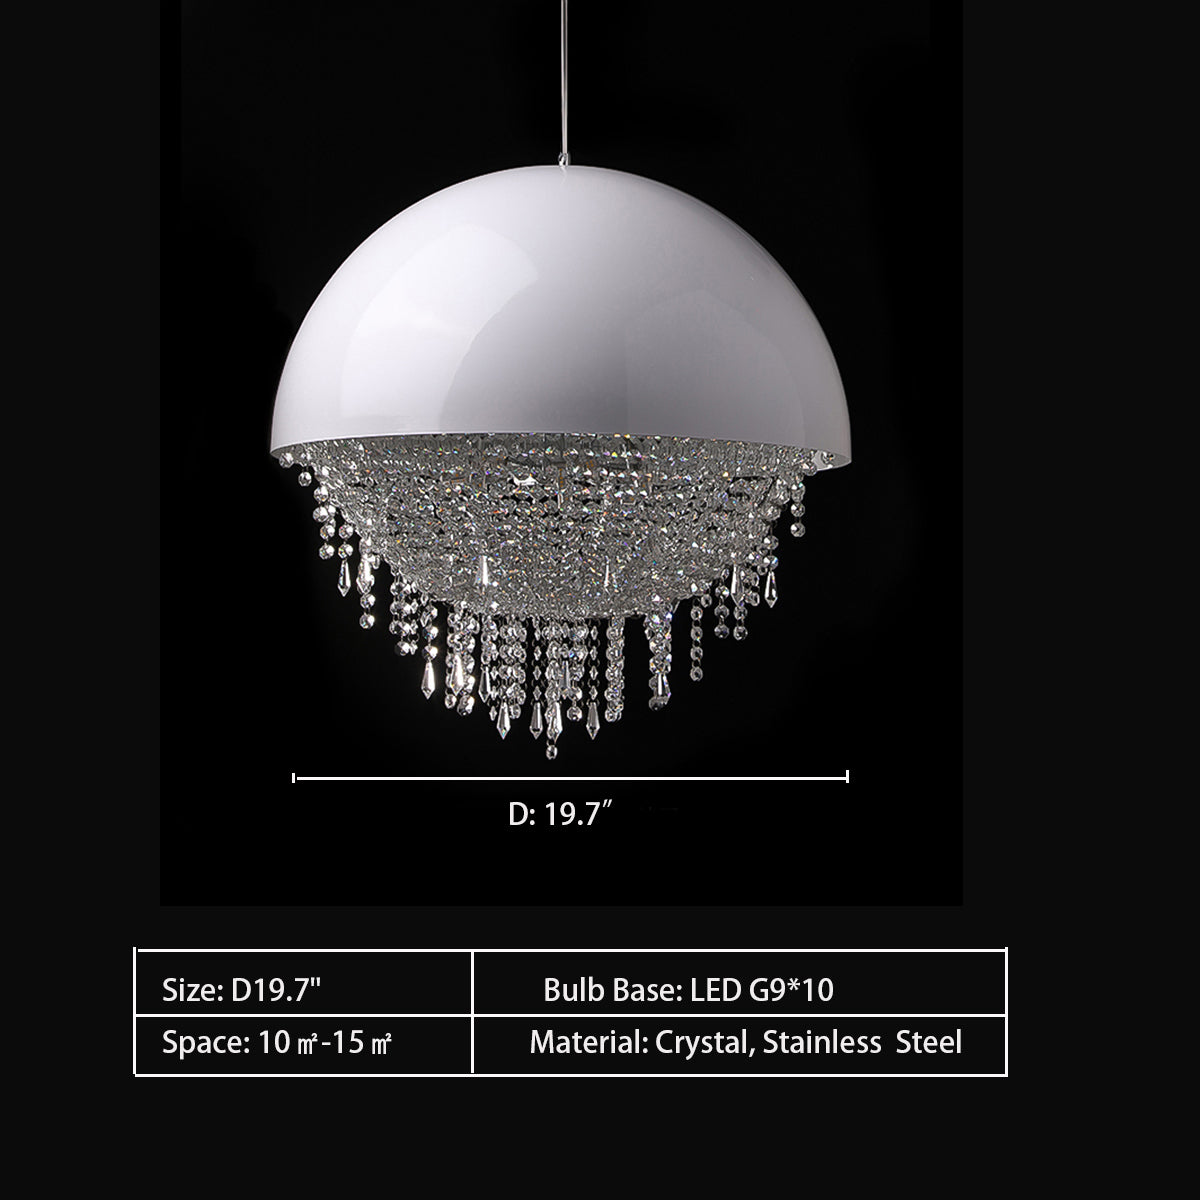 D19.7"  Ozero by Manooi ( brass ) replica chandelier ,chandelier,chandeliers,crystal pendant,crystal,sphere,stainless steel,round table,round,dining table,bar,luxury